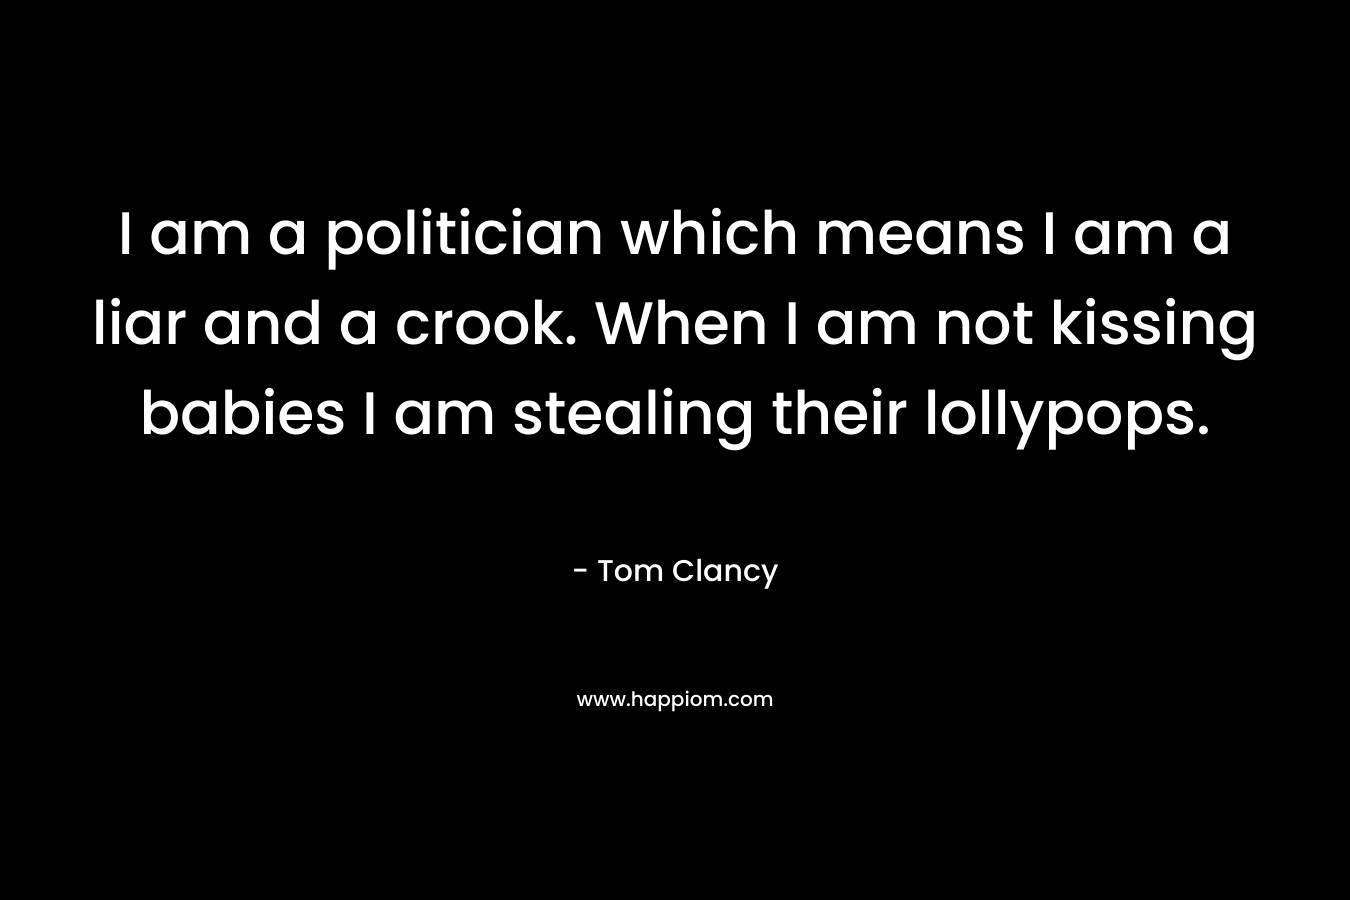 I am a politician which means I am a liar and a crook. When I am not kissing babies I am stealing their lollypops.